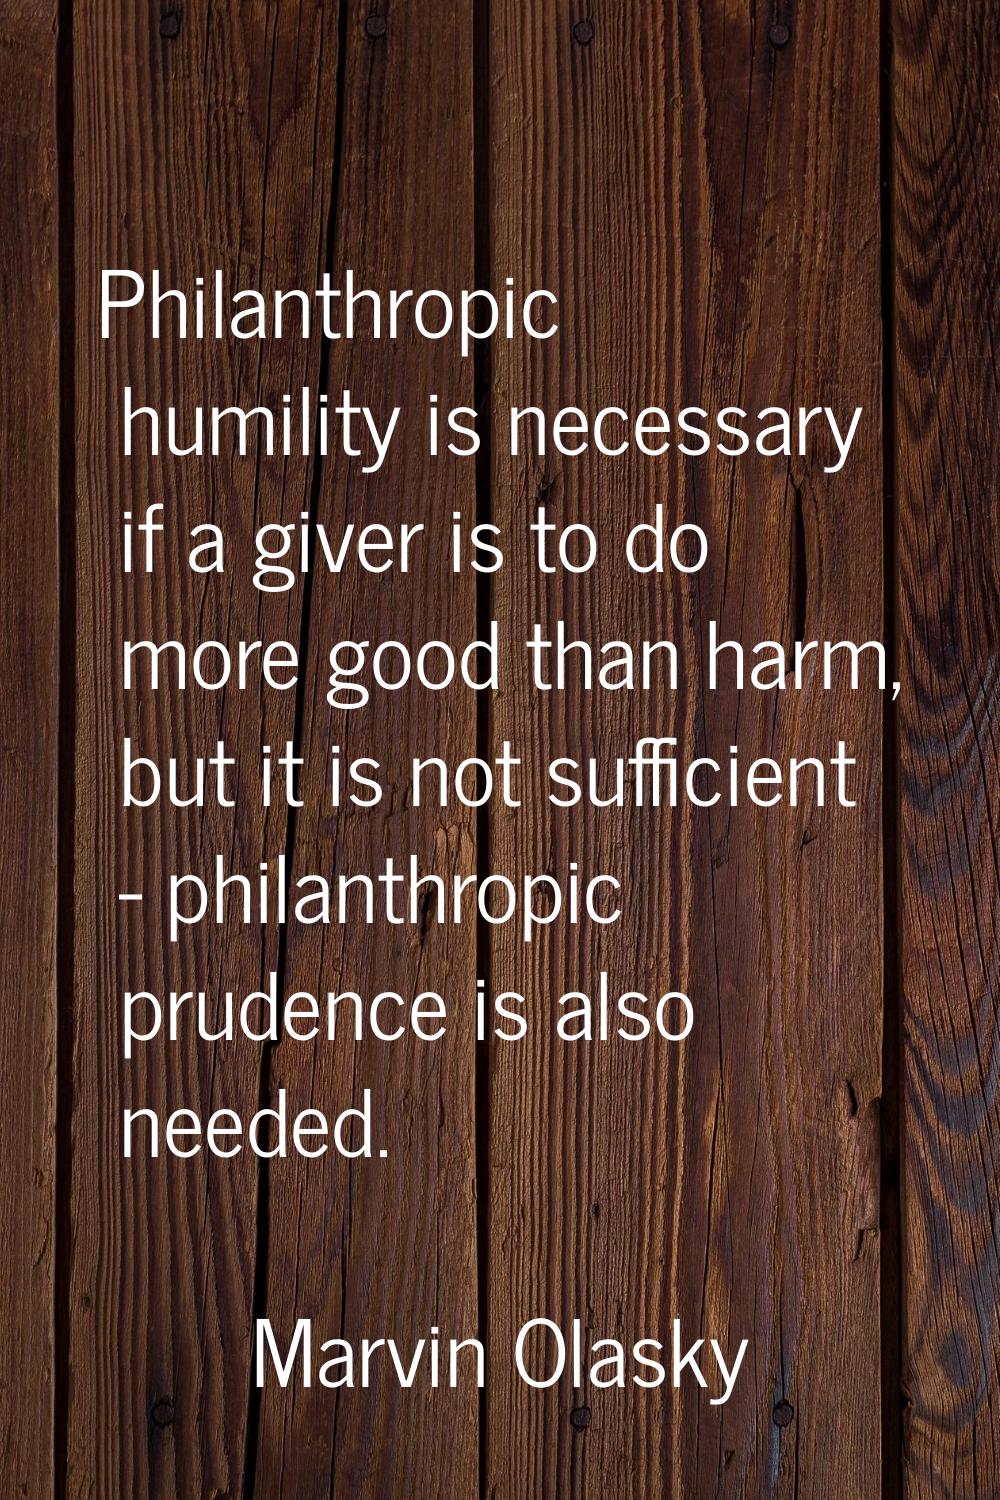 Philanthropic humility is necessary if a giver is to do more good than harm, but it is not sufficie